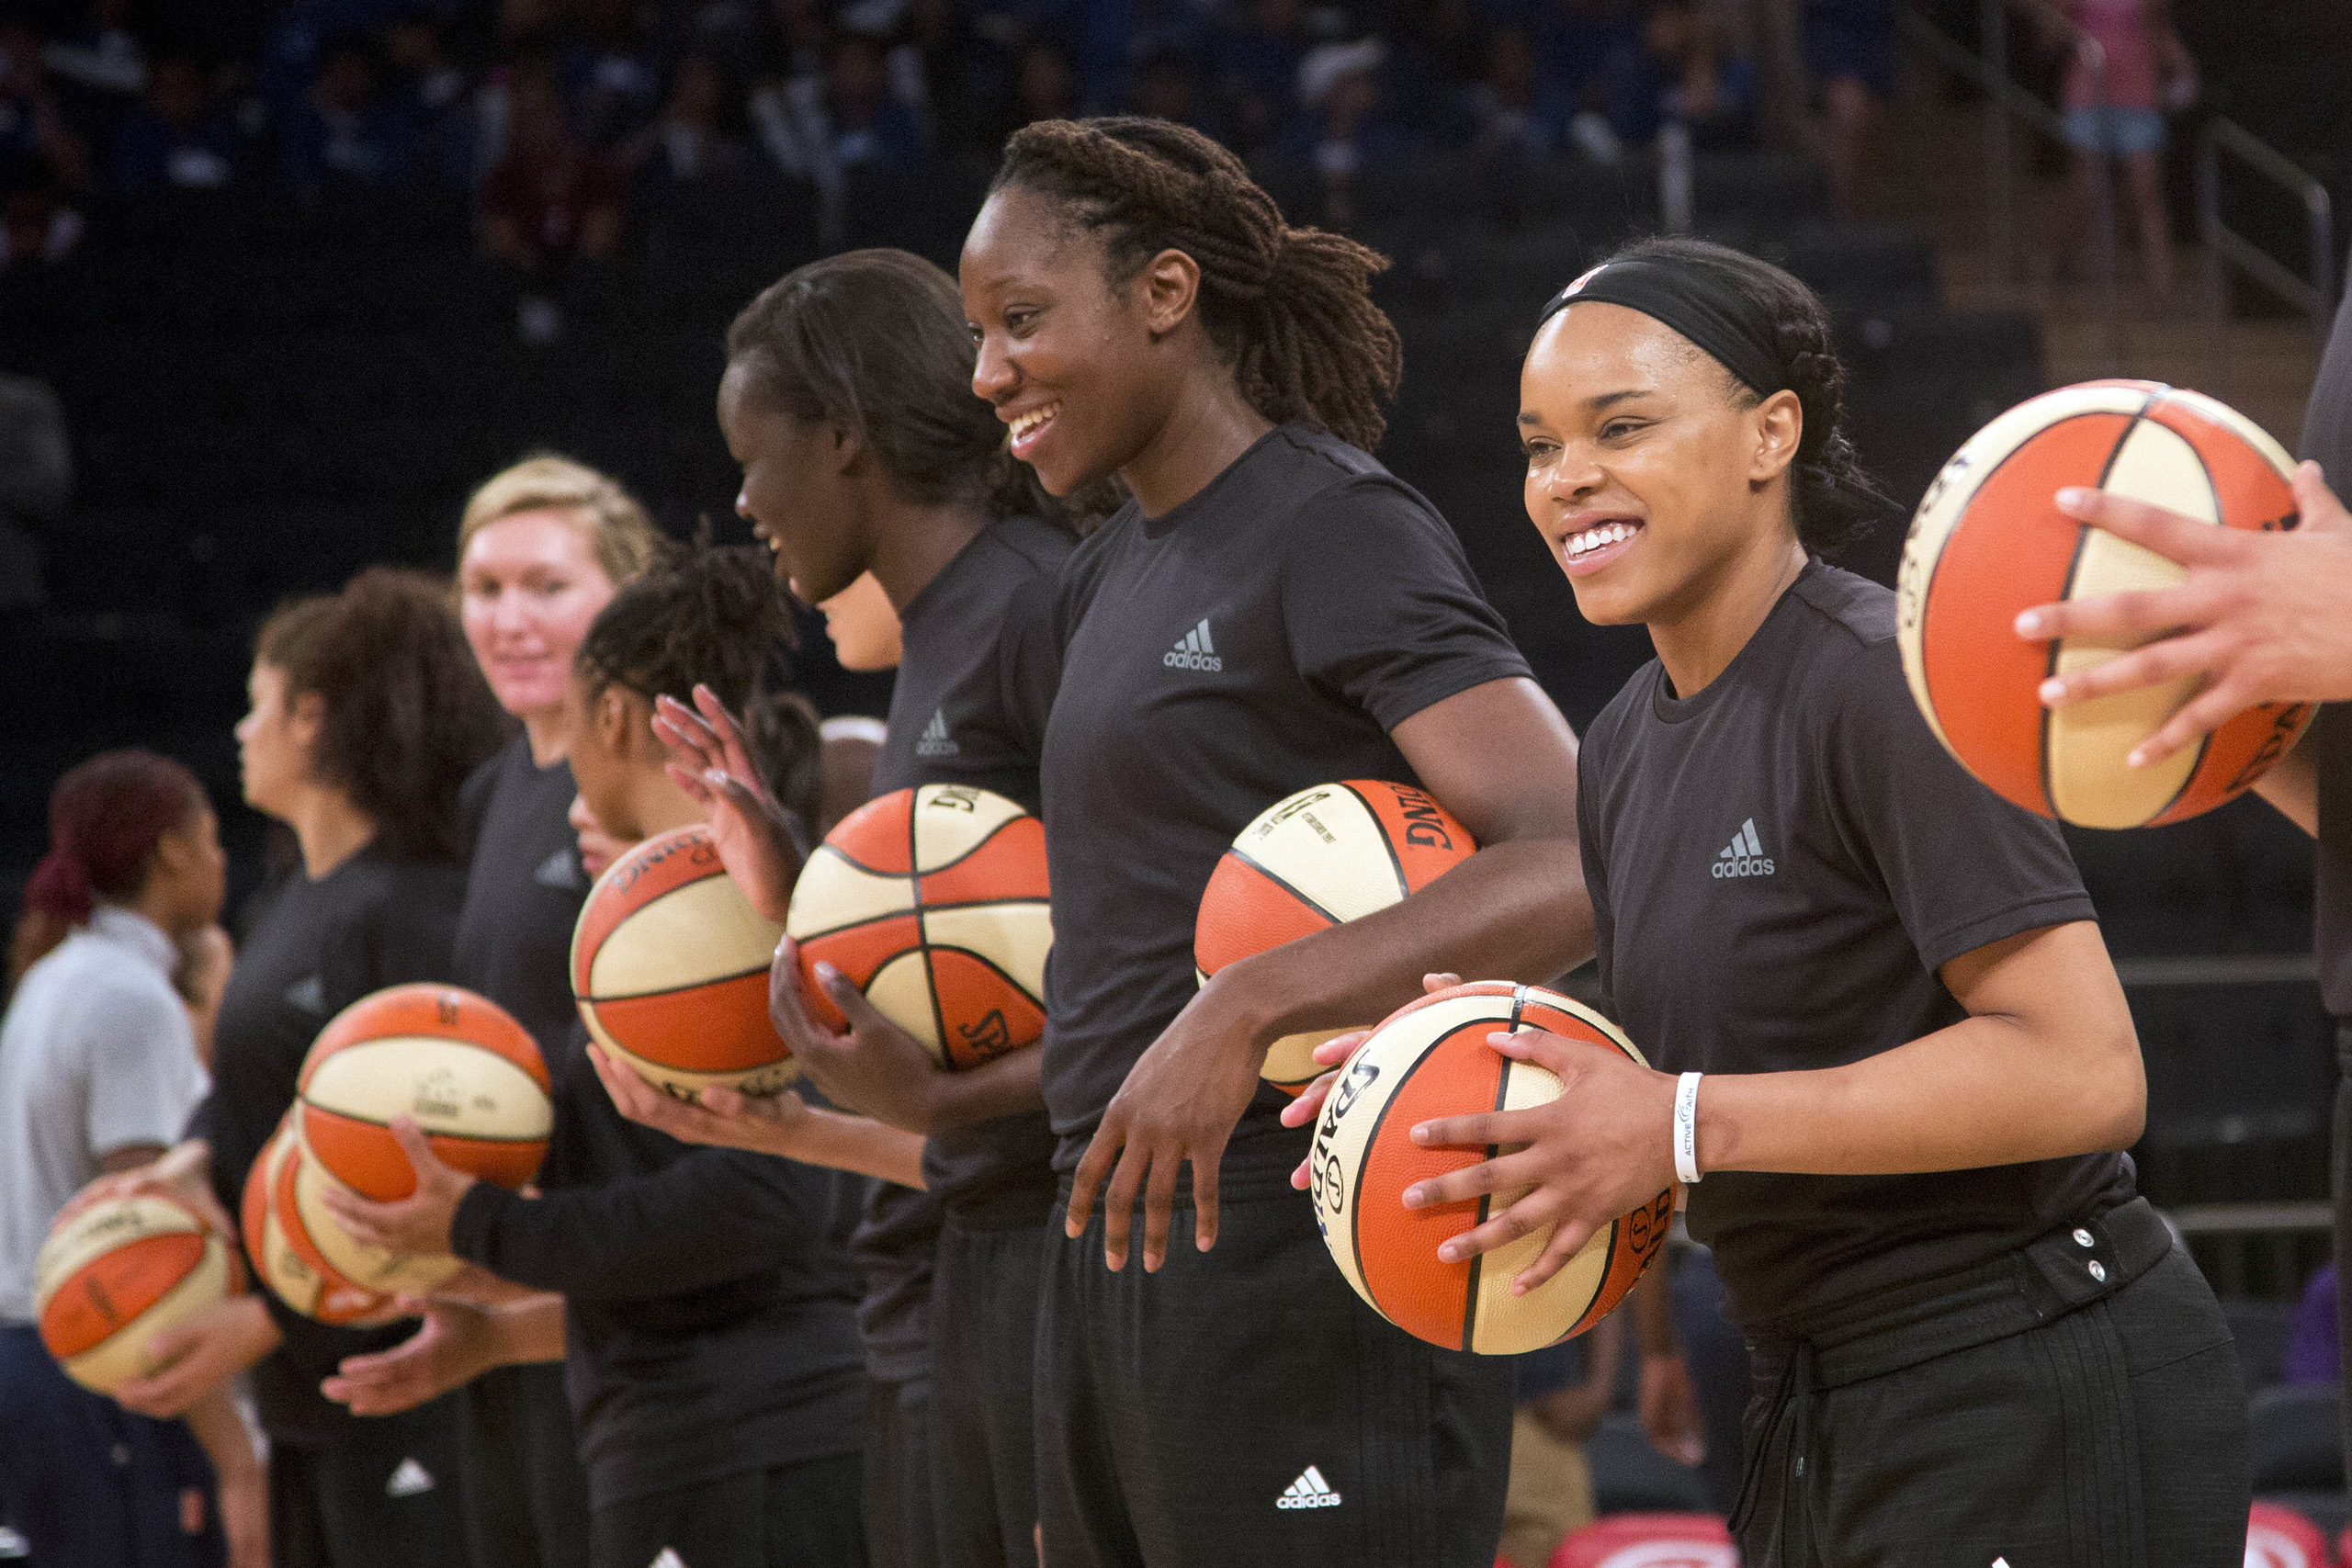 Members of the New York Liberty basketball team await the start of a game against the Atlanta Dream in New York City on July 13, 2016. (Mark Lennihan—AP)